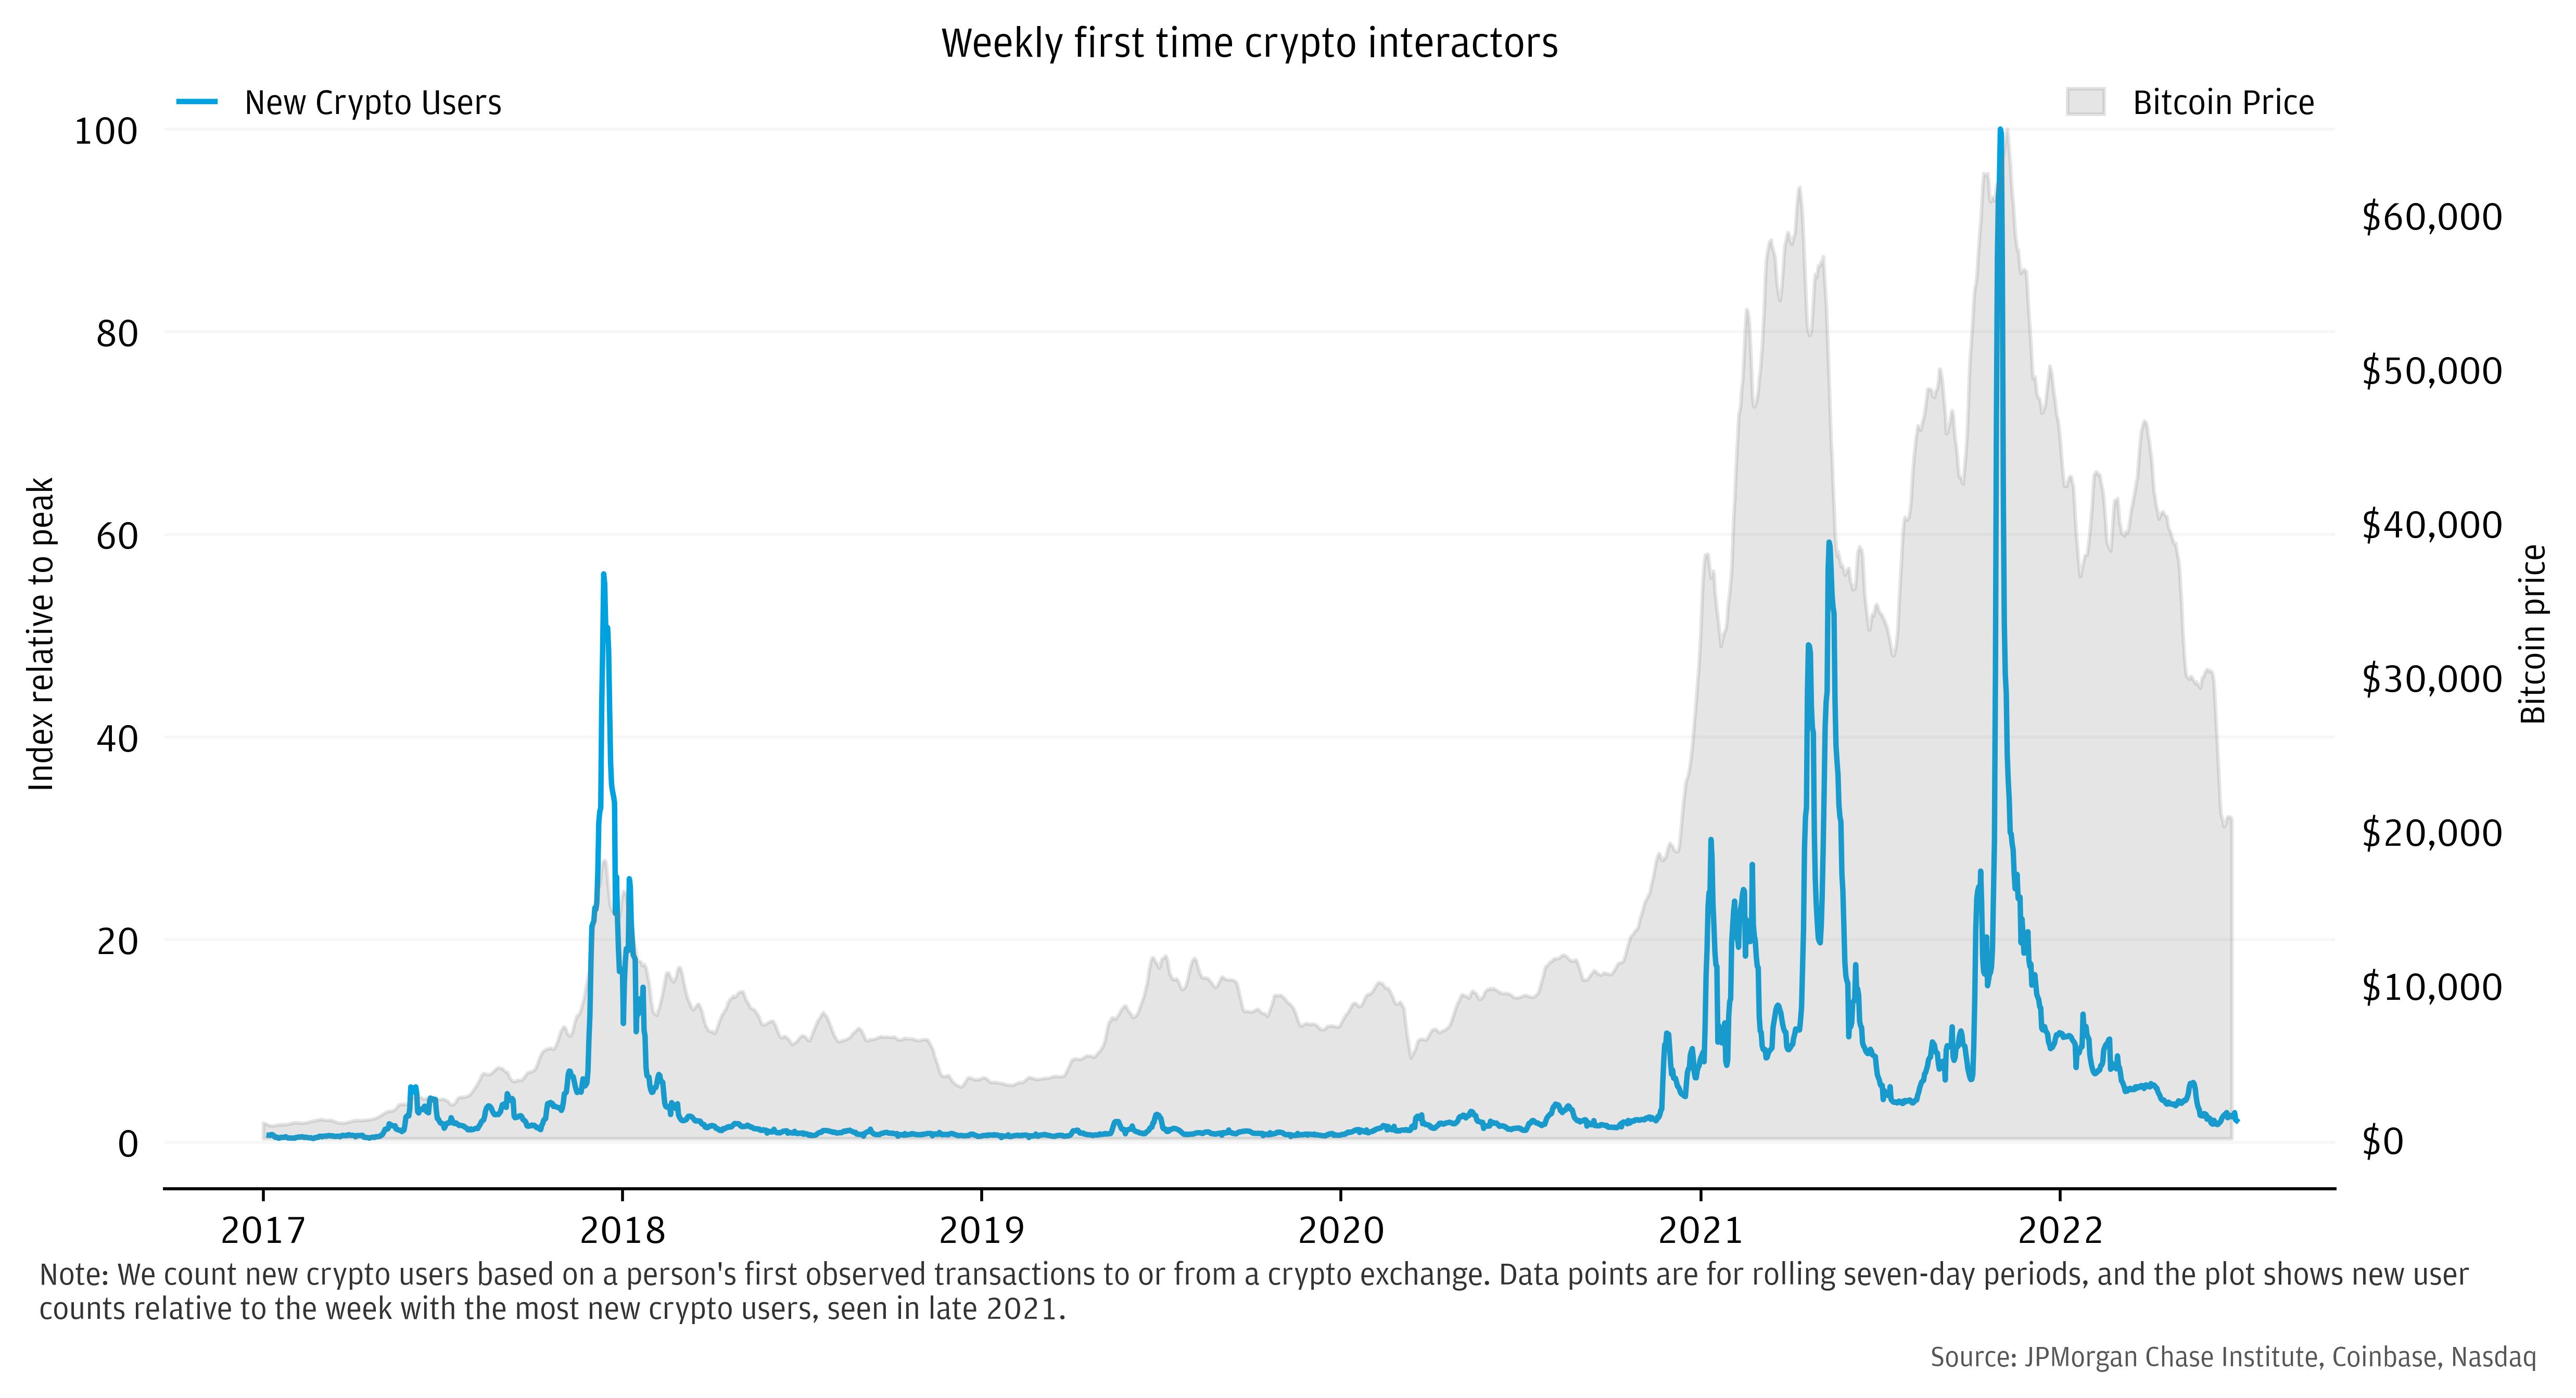 Surges in the crypto user base coincide with significant spikes in bitcoin prices.